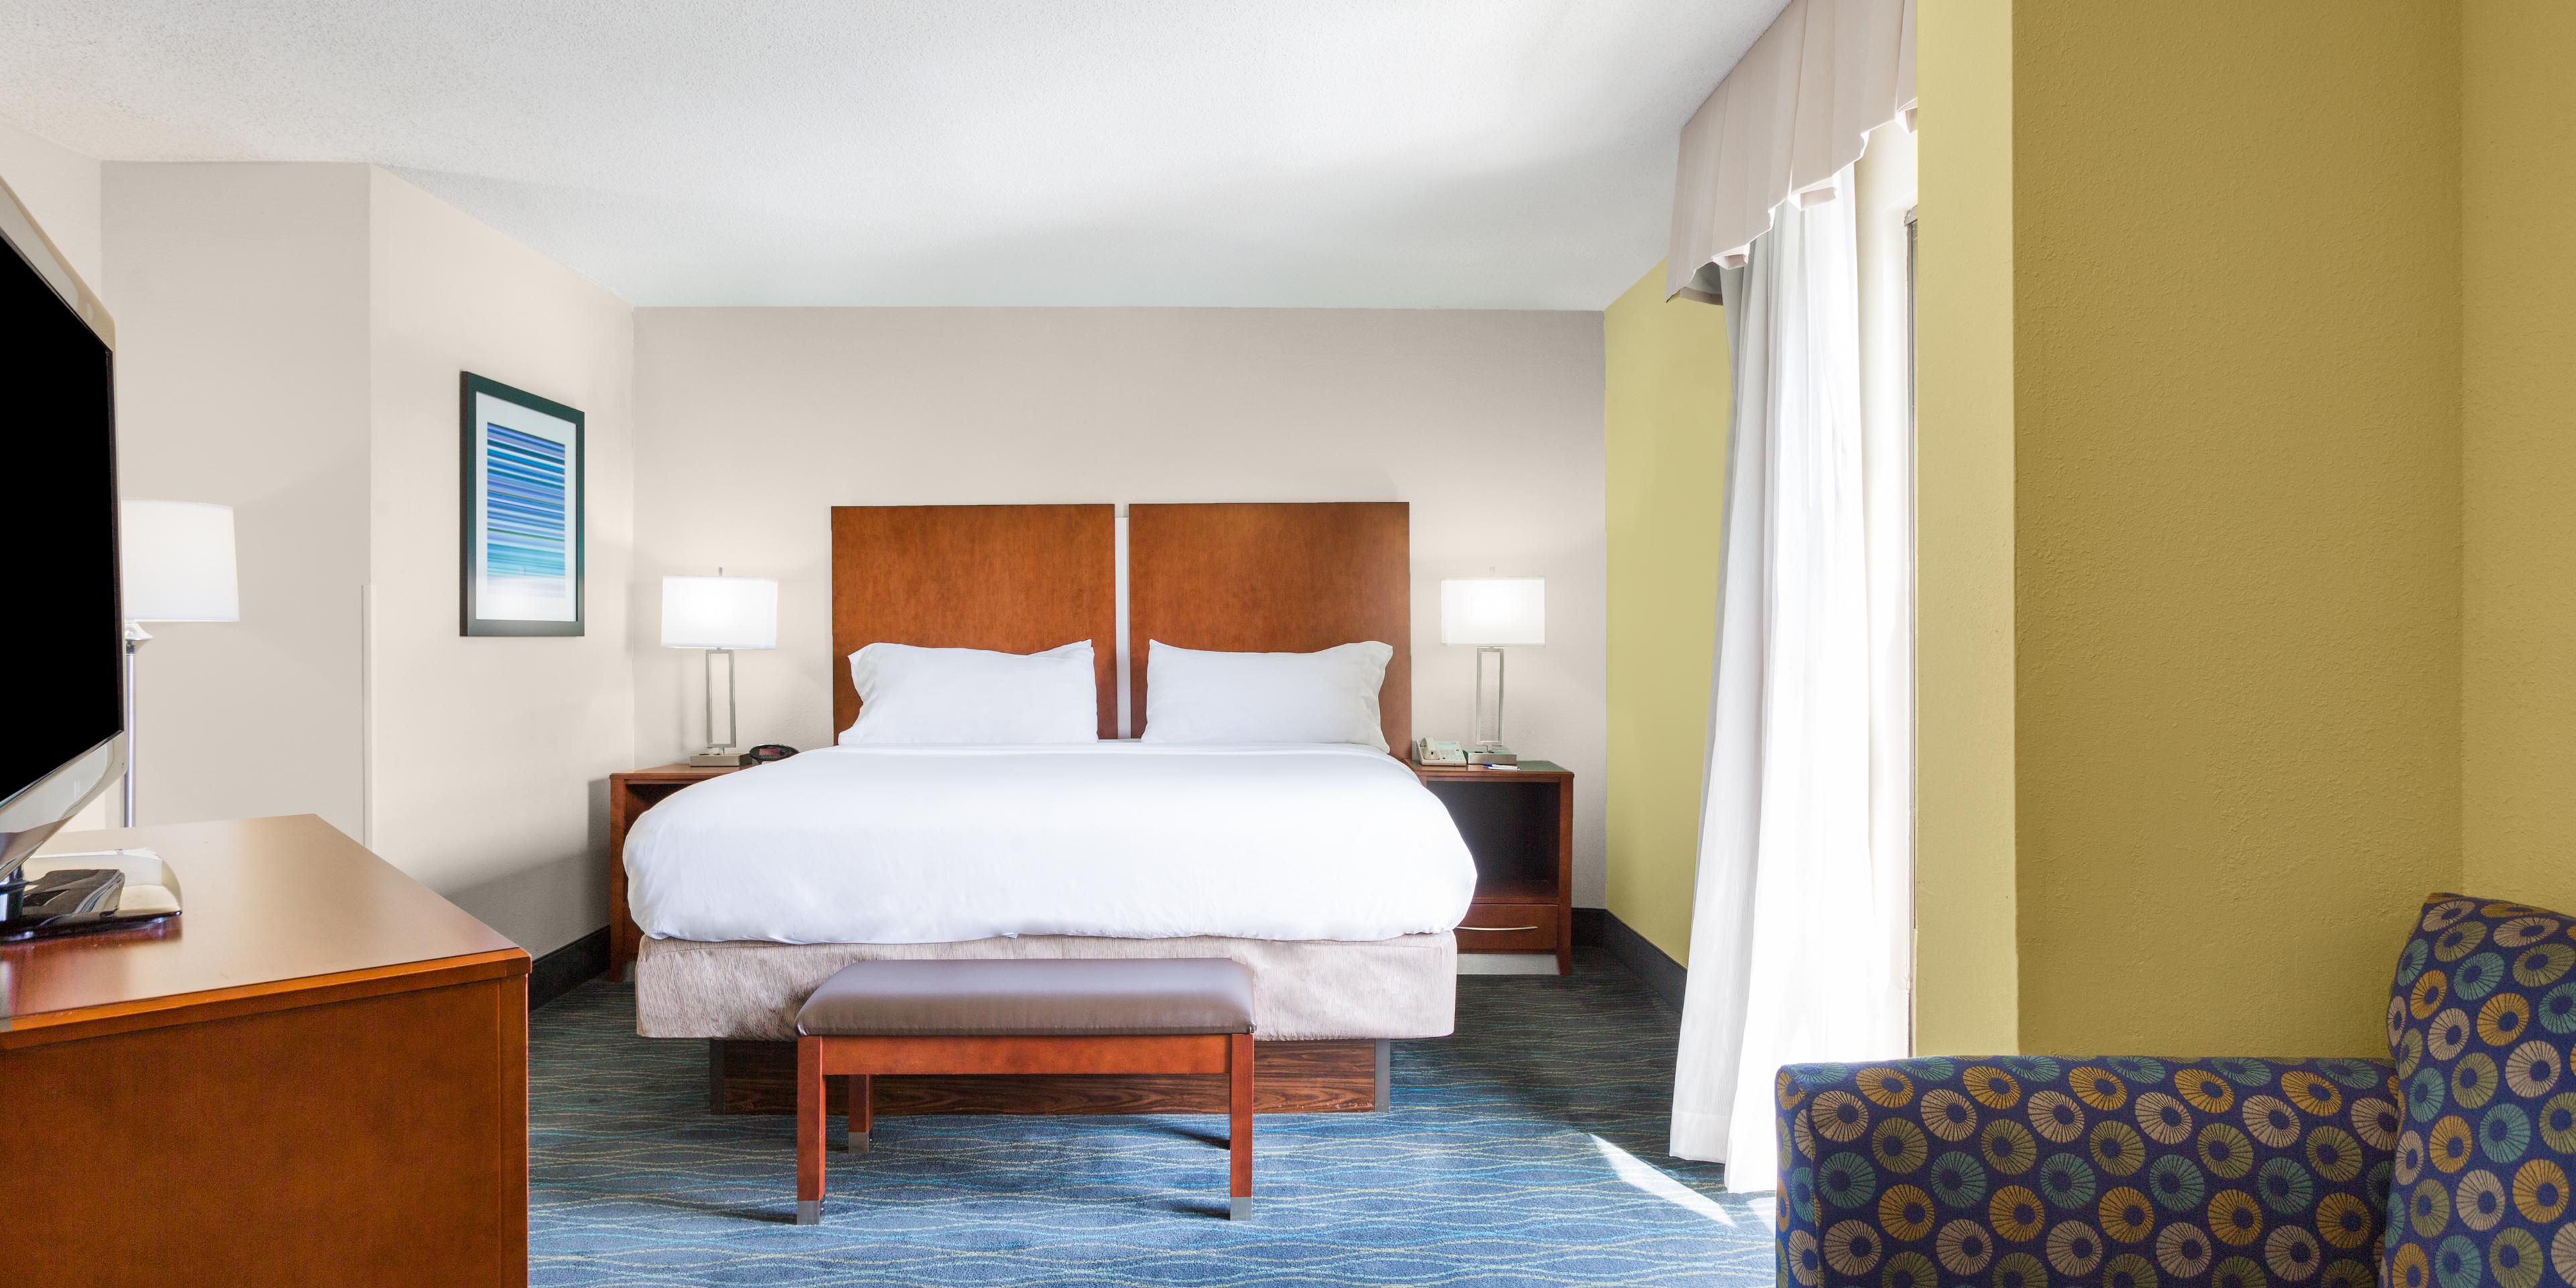 Our hotel in Wilmington, NC features many different room types including two varieties of suites - the Executive Suite and the Imperial Suite. Although configured differently, they both feature a king size bed with a separate living room area and kitchenette.